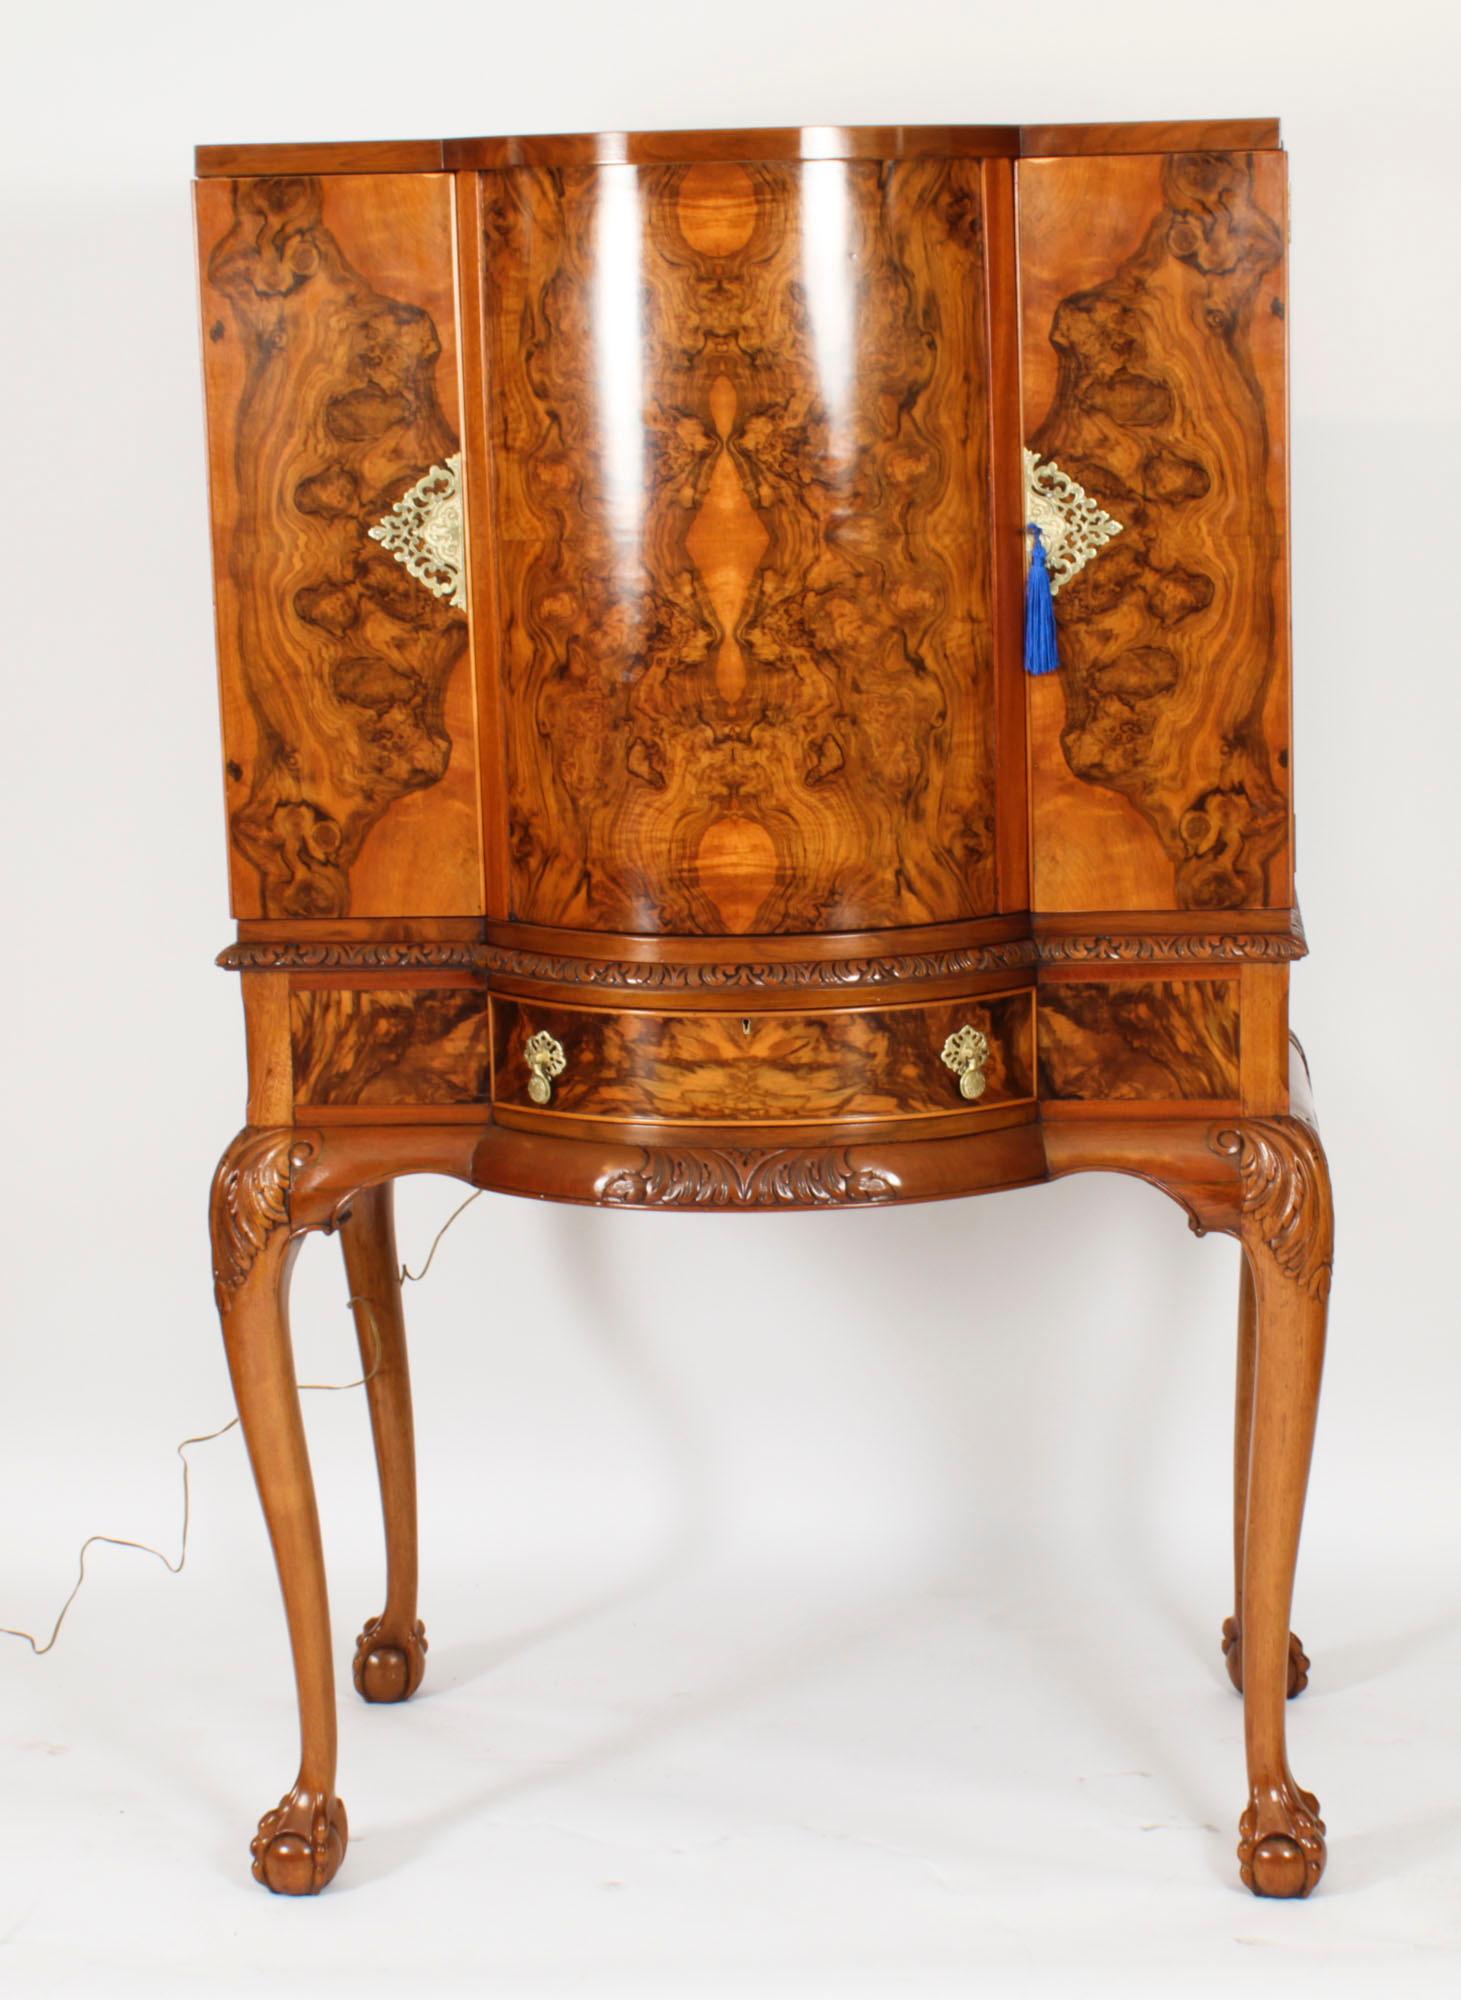 This is a fantastic antique Queen Anne Revival  burr walnut cocktail cabinet with fitted and mirrored revolving interior, dating from C 1920.

The two doors opens to a fitted mirrored interior with a central drum revolving section with pop out